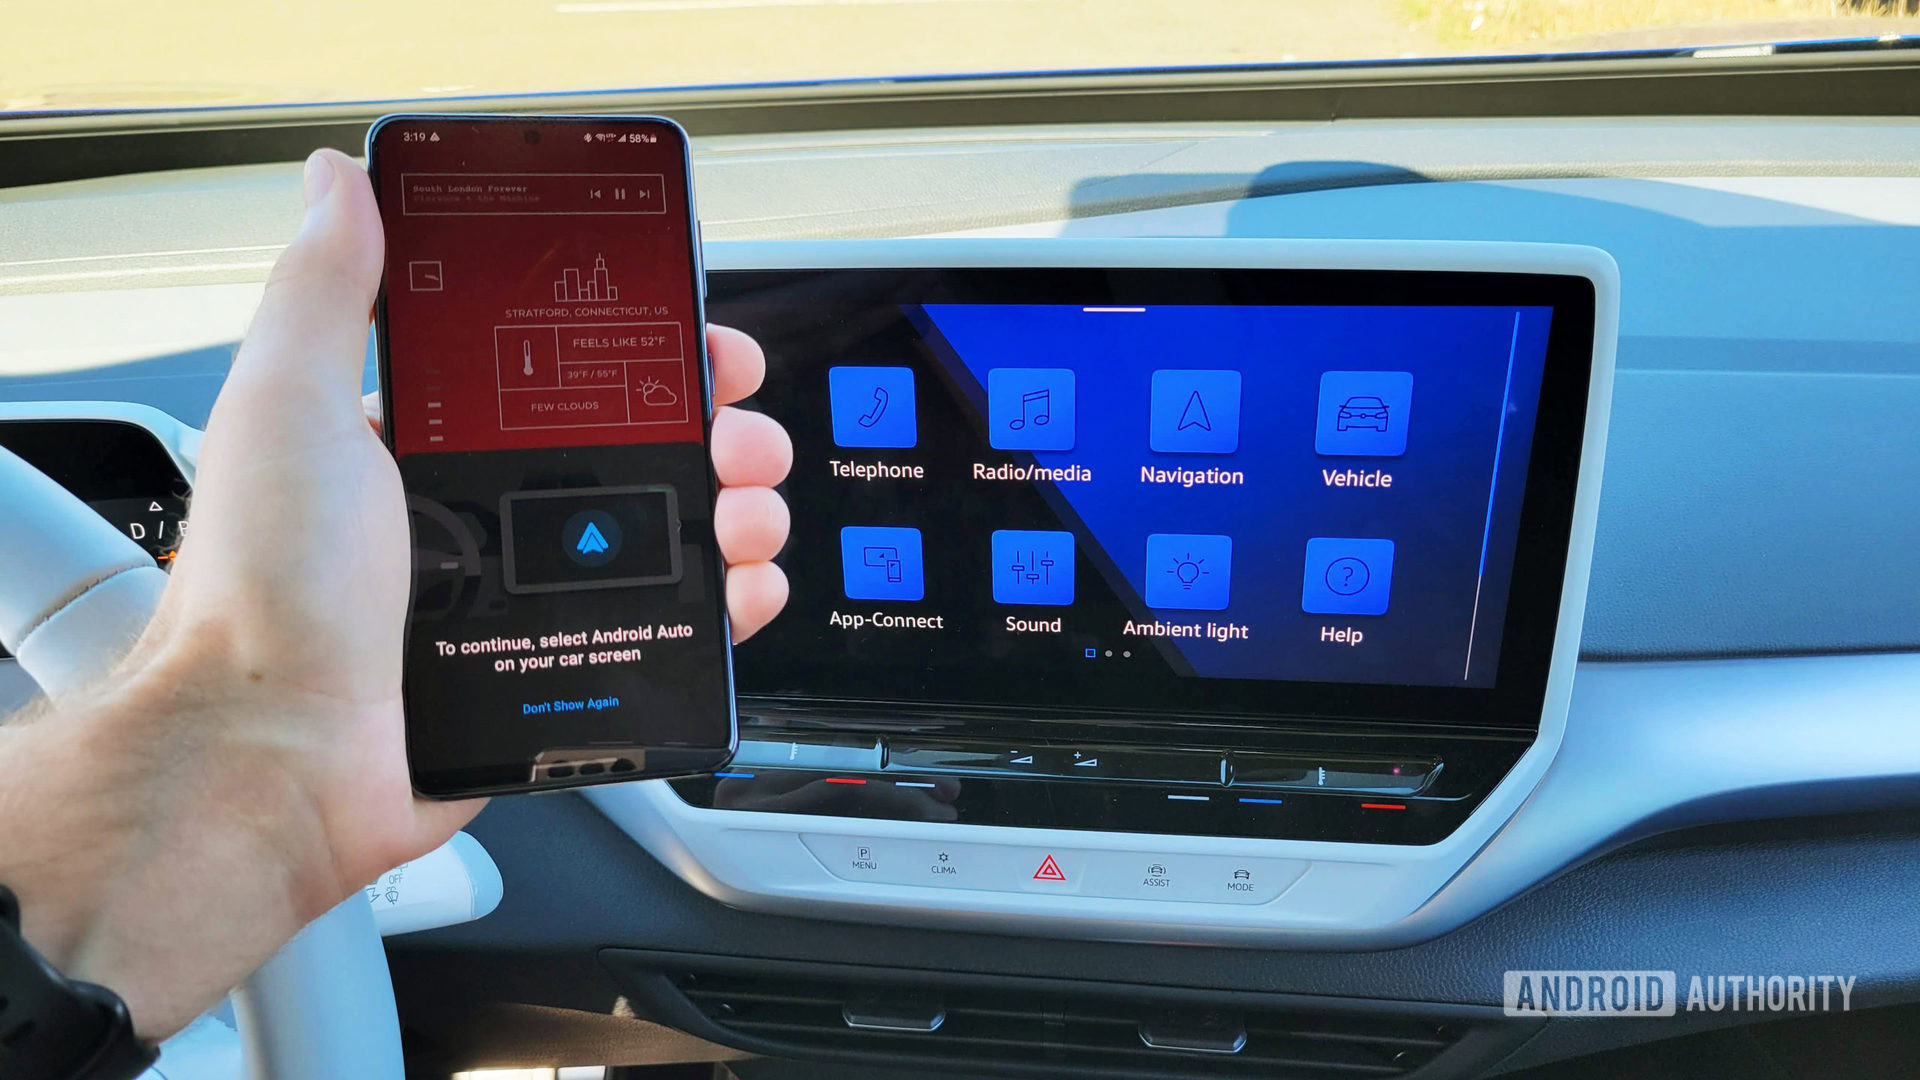 How to connect Android Auto to your car - Android Authority